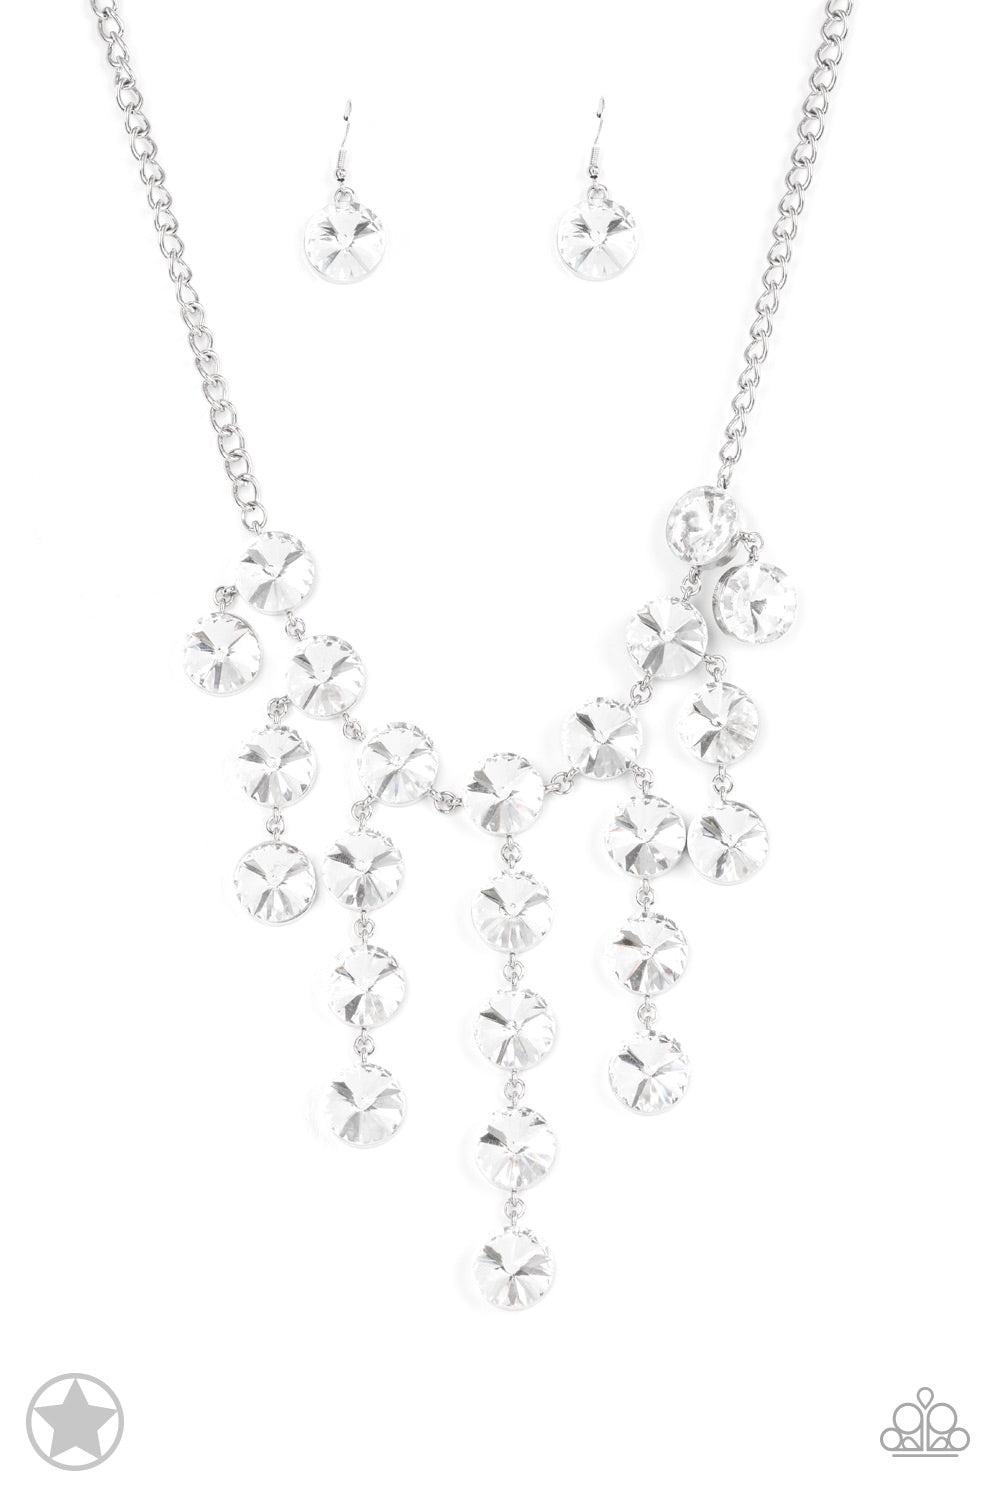 Spotlight Stunner Paparazzi Accessories Necklace with Earrings